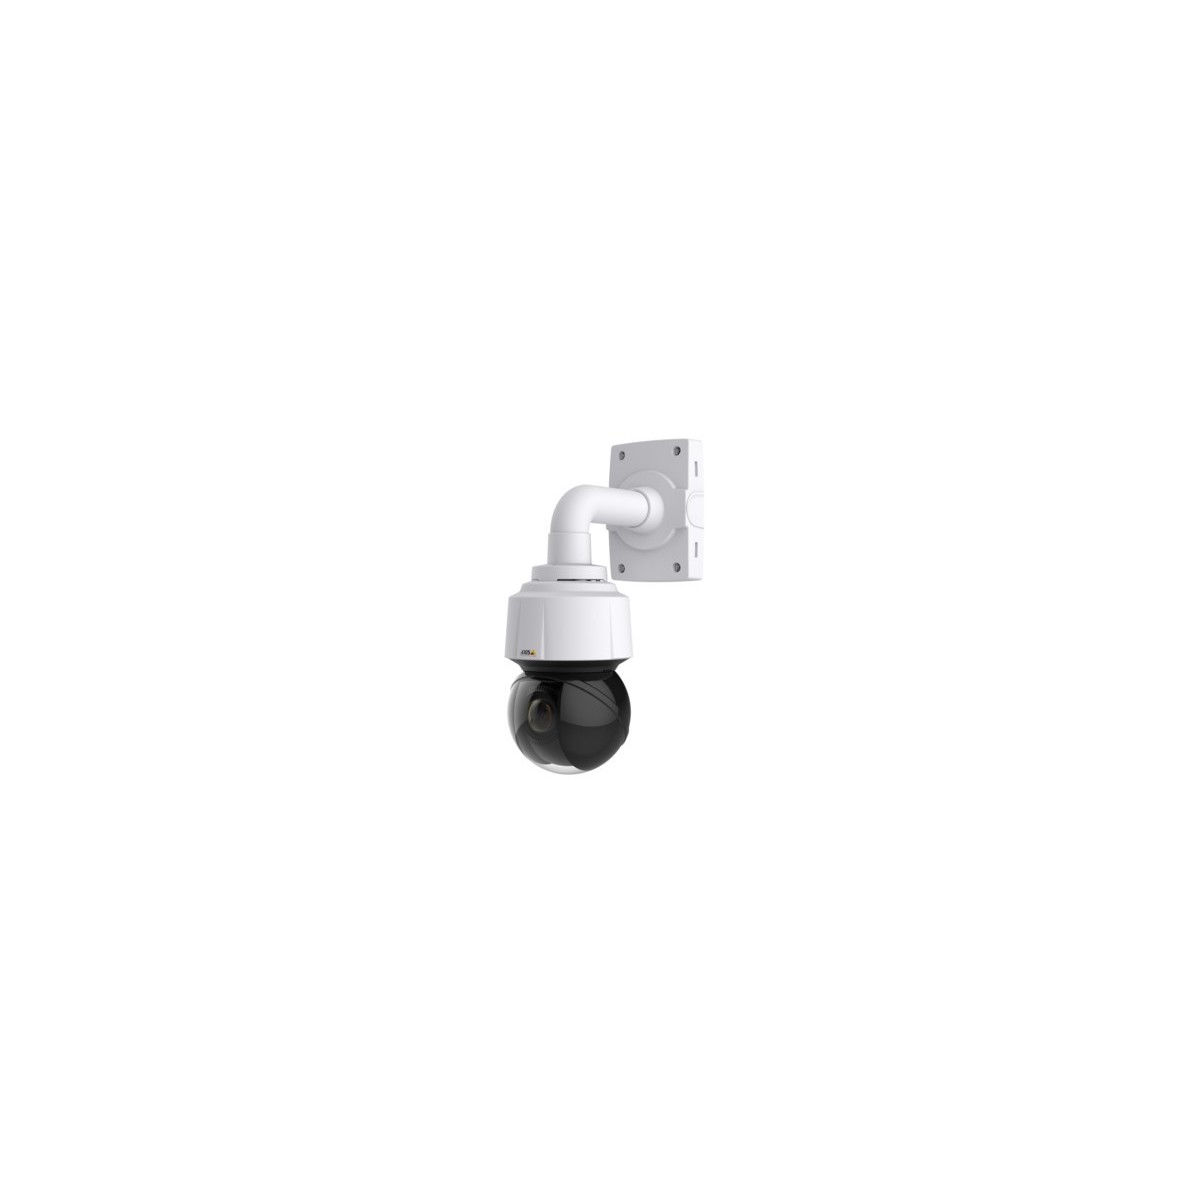 Axis Q6128-E - IP security camera - Indoor & outdoor - Wired - Simplified Chinese - Traditional Chinese - German - English - Spa